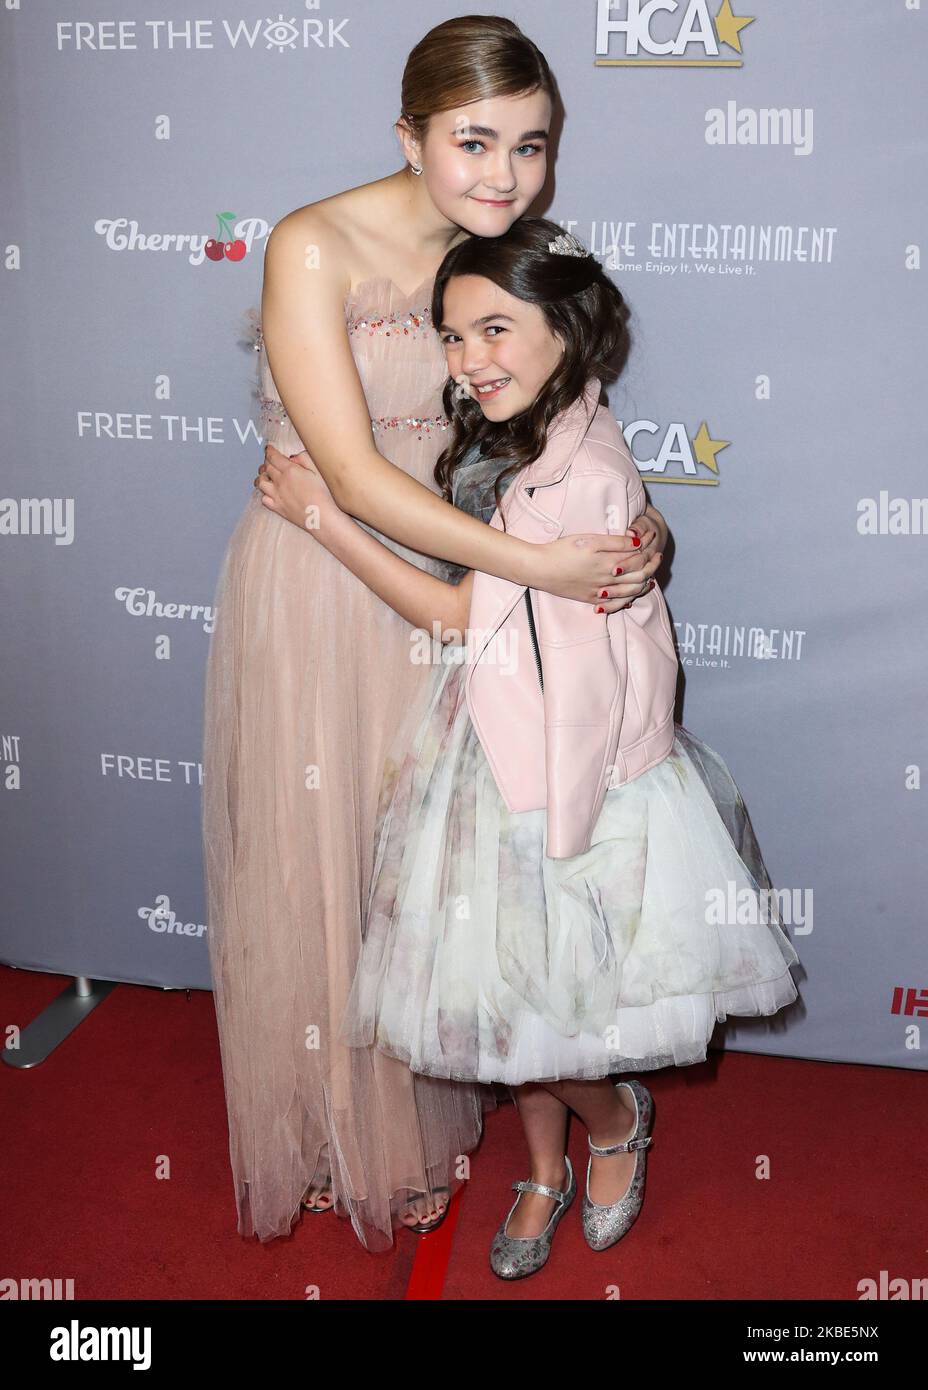 HOLLYWOOD, LOS ANGELES, CALIFORNIA, USA - JANUARY 09: Millicent Simmonds and Brooklyn Prince arrive at the 3rd Annual Hollywood Critics' Awards held at the Taglyan Cultural Complex on January 9, 2020 in Hollywood, Los Angeles, California, United States. (Photo by Xavier Collin/Image Press Agency/NurPhoto) Stock Photo